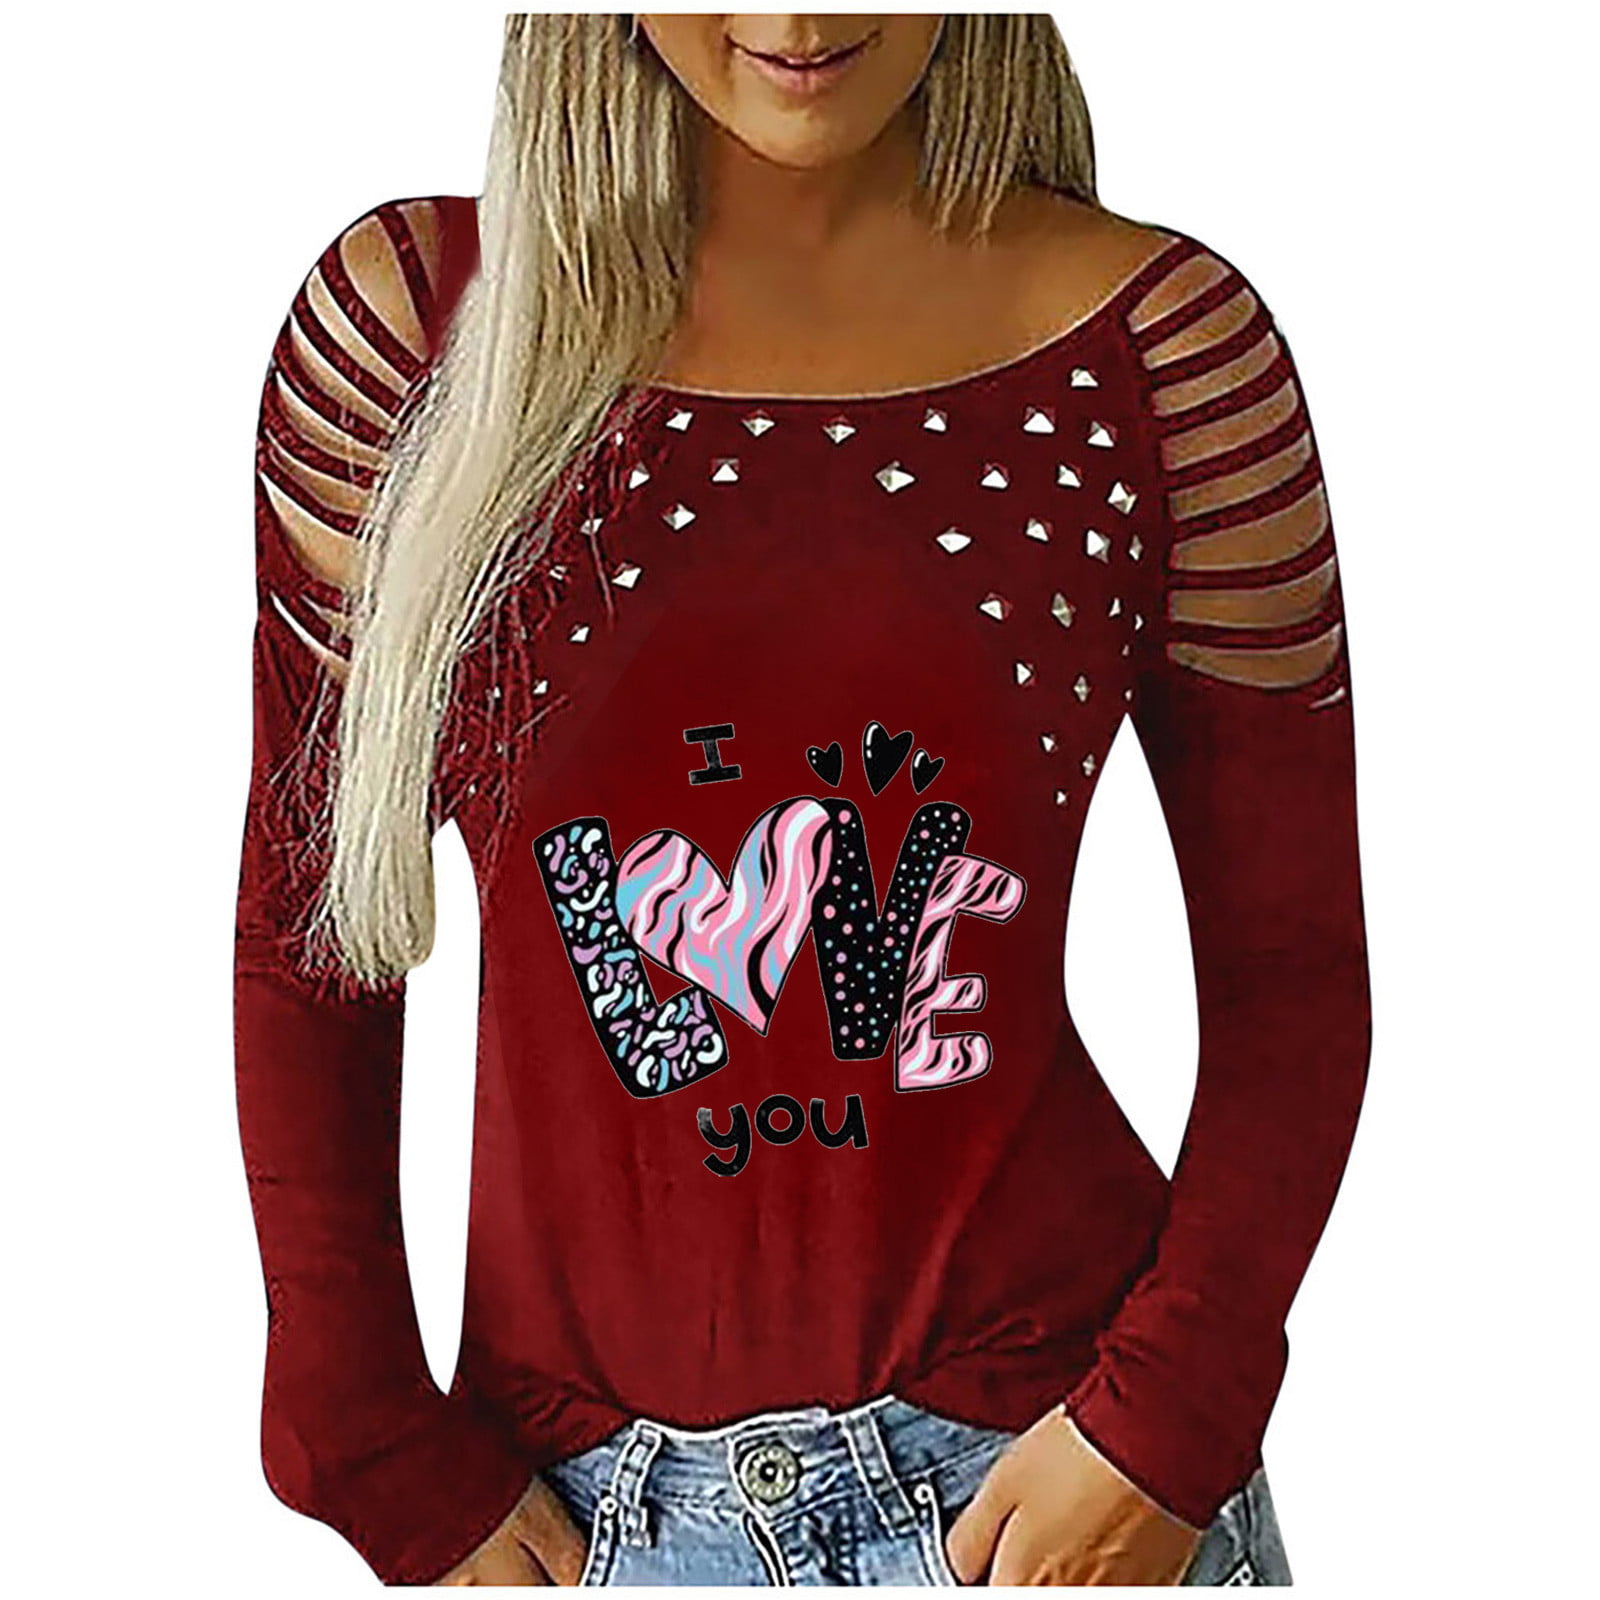 XFLWAM Women's Round Neck Valentine's Day Tops T-shirt Cut Out Long ...